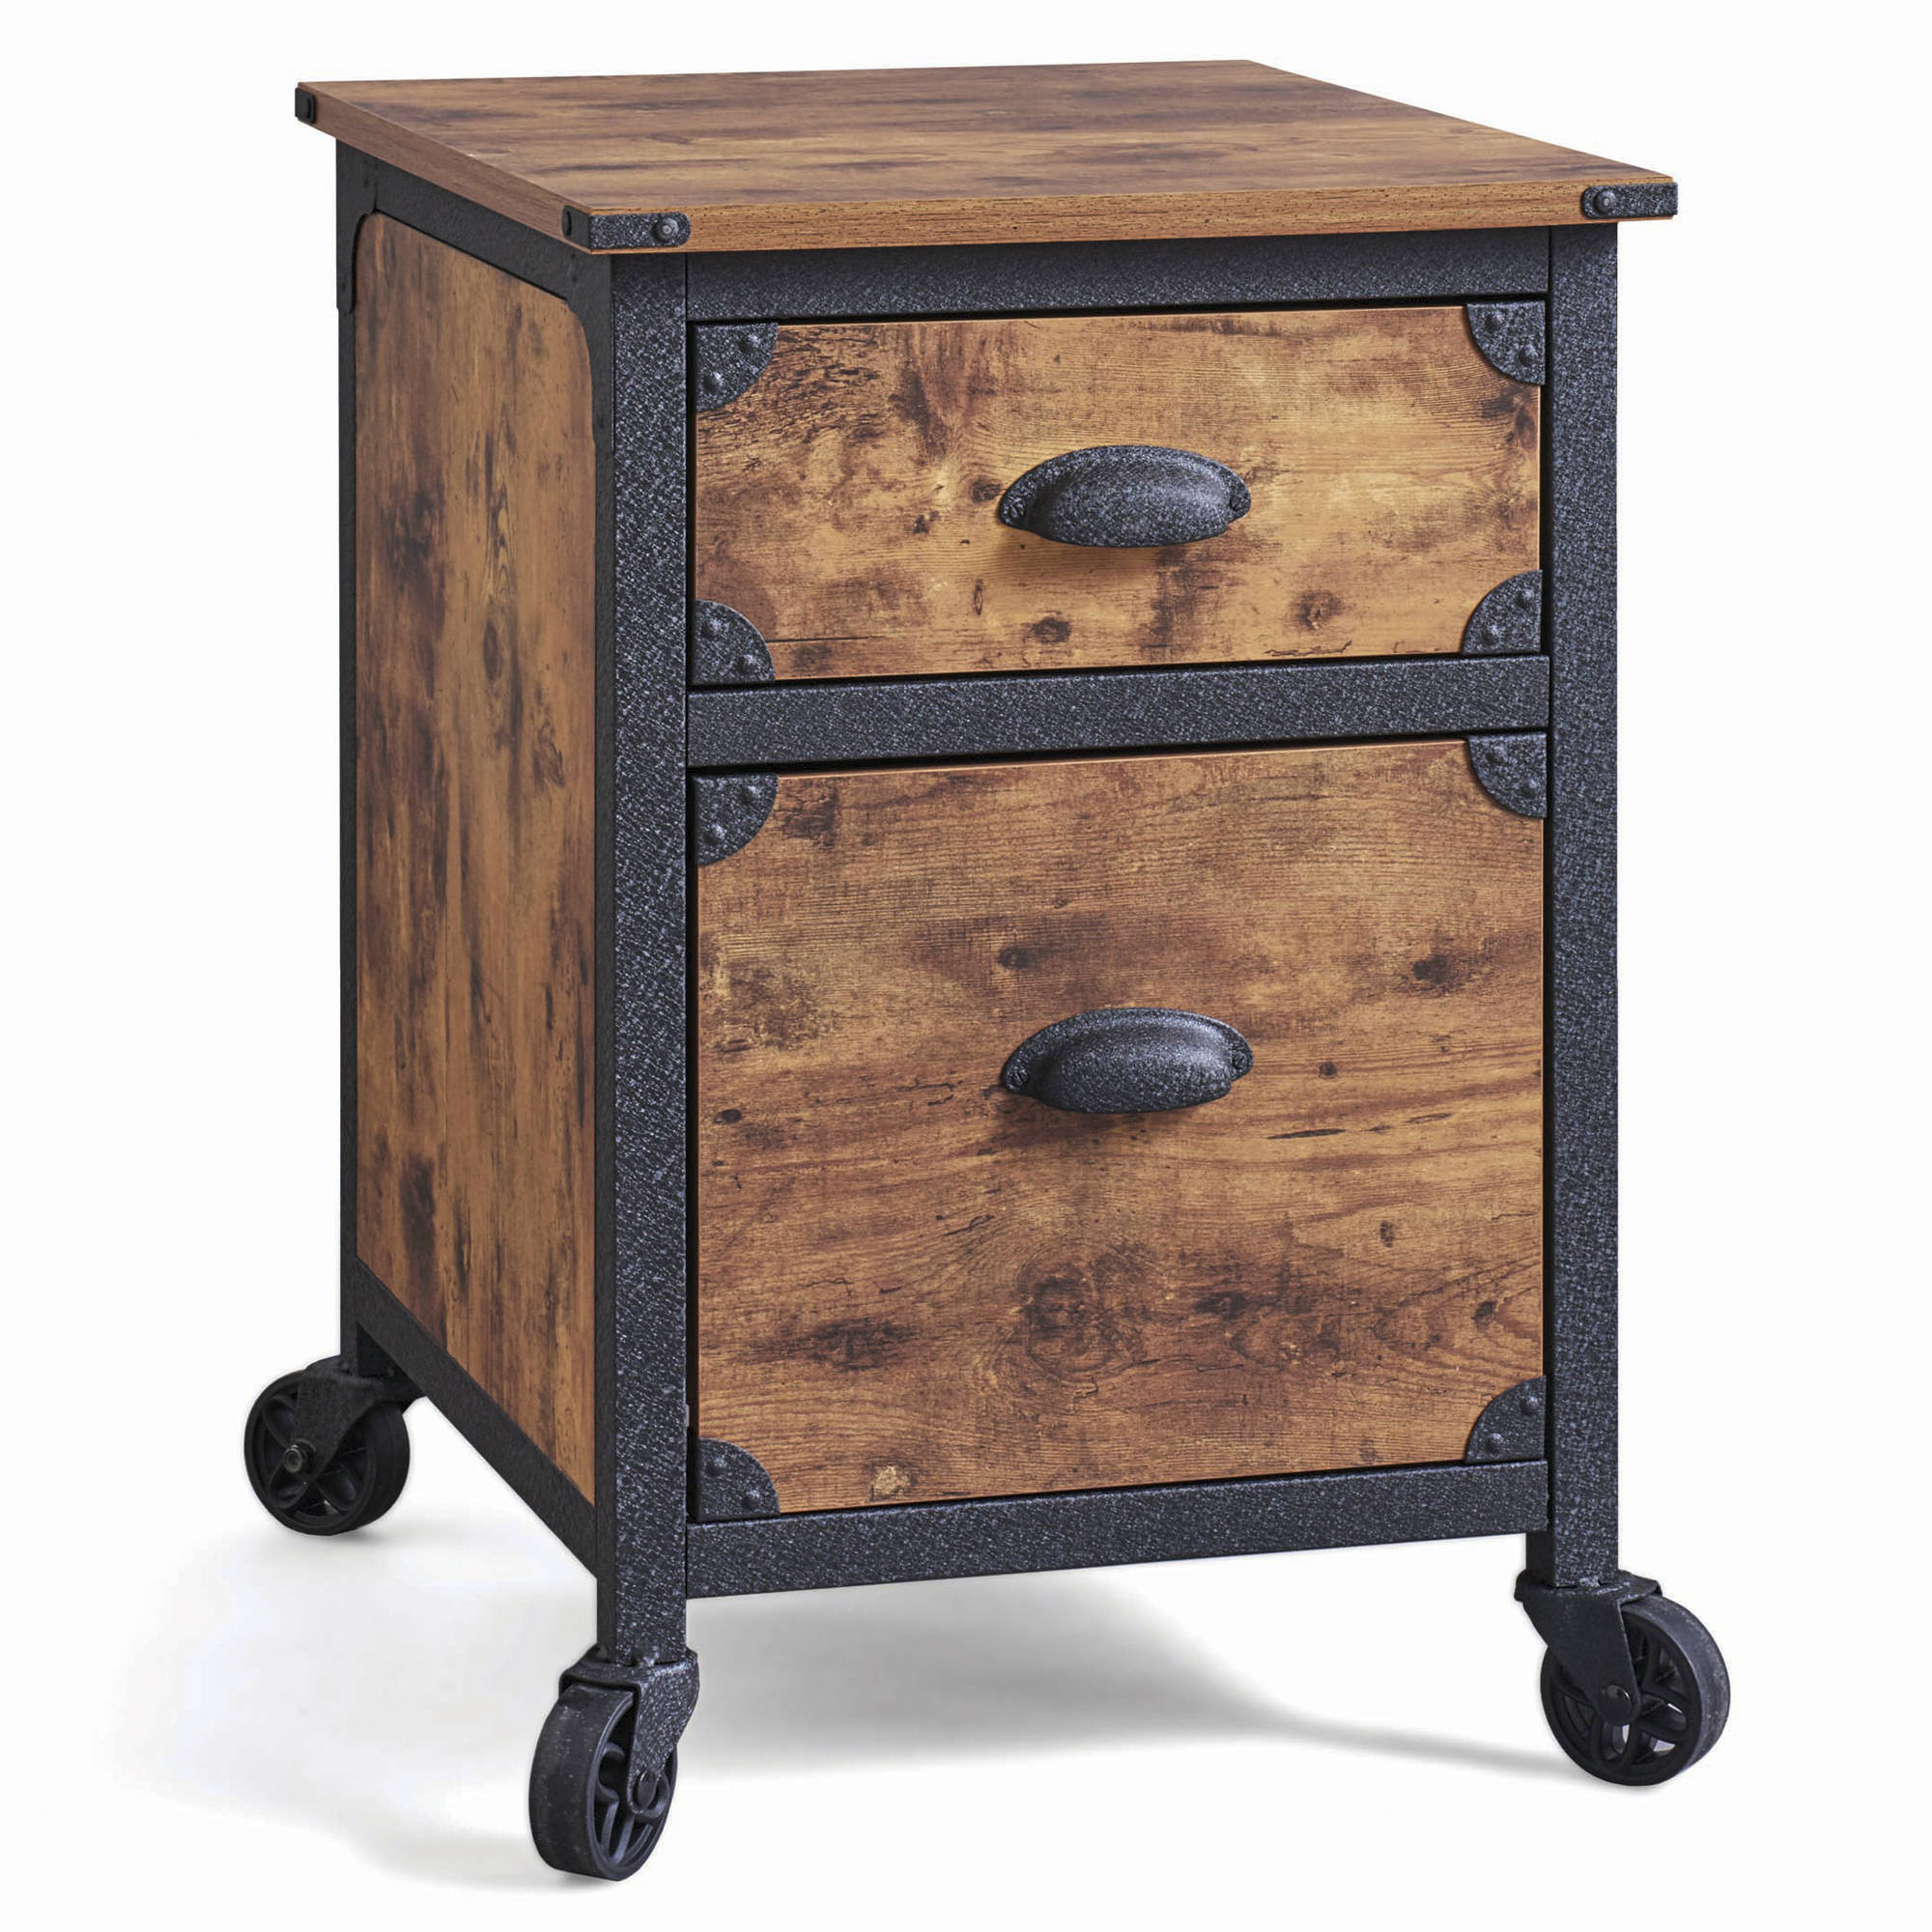 Better Homes Gardens 2 Drawer Rustic Country File Cabinet Weathered Pine Finish pertaining to size 2000 X 2000